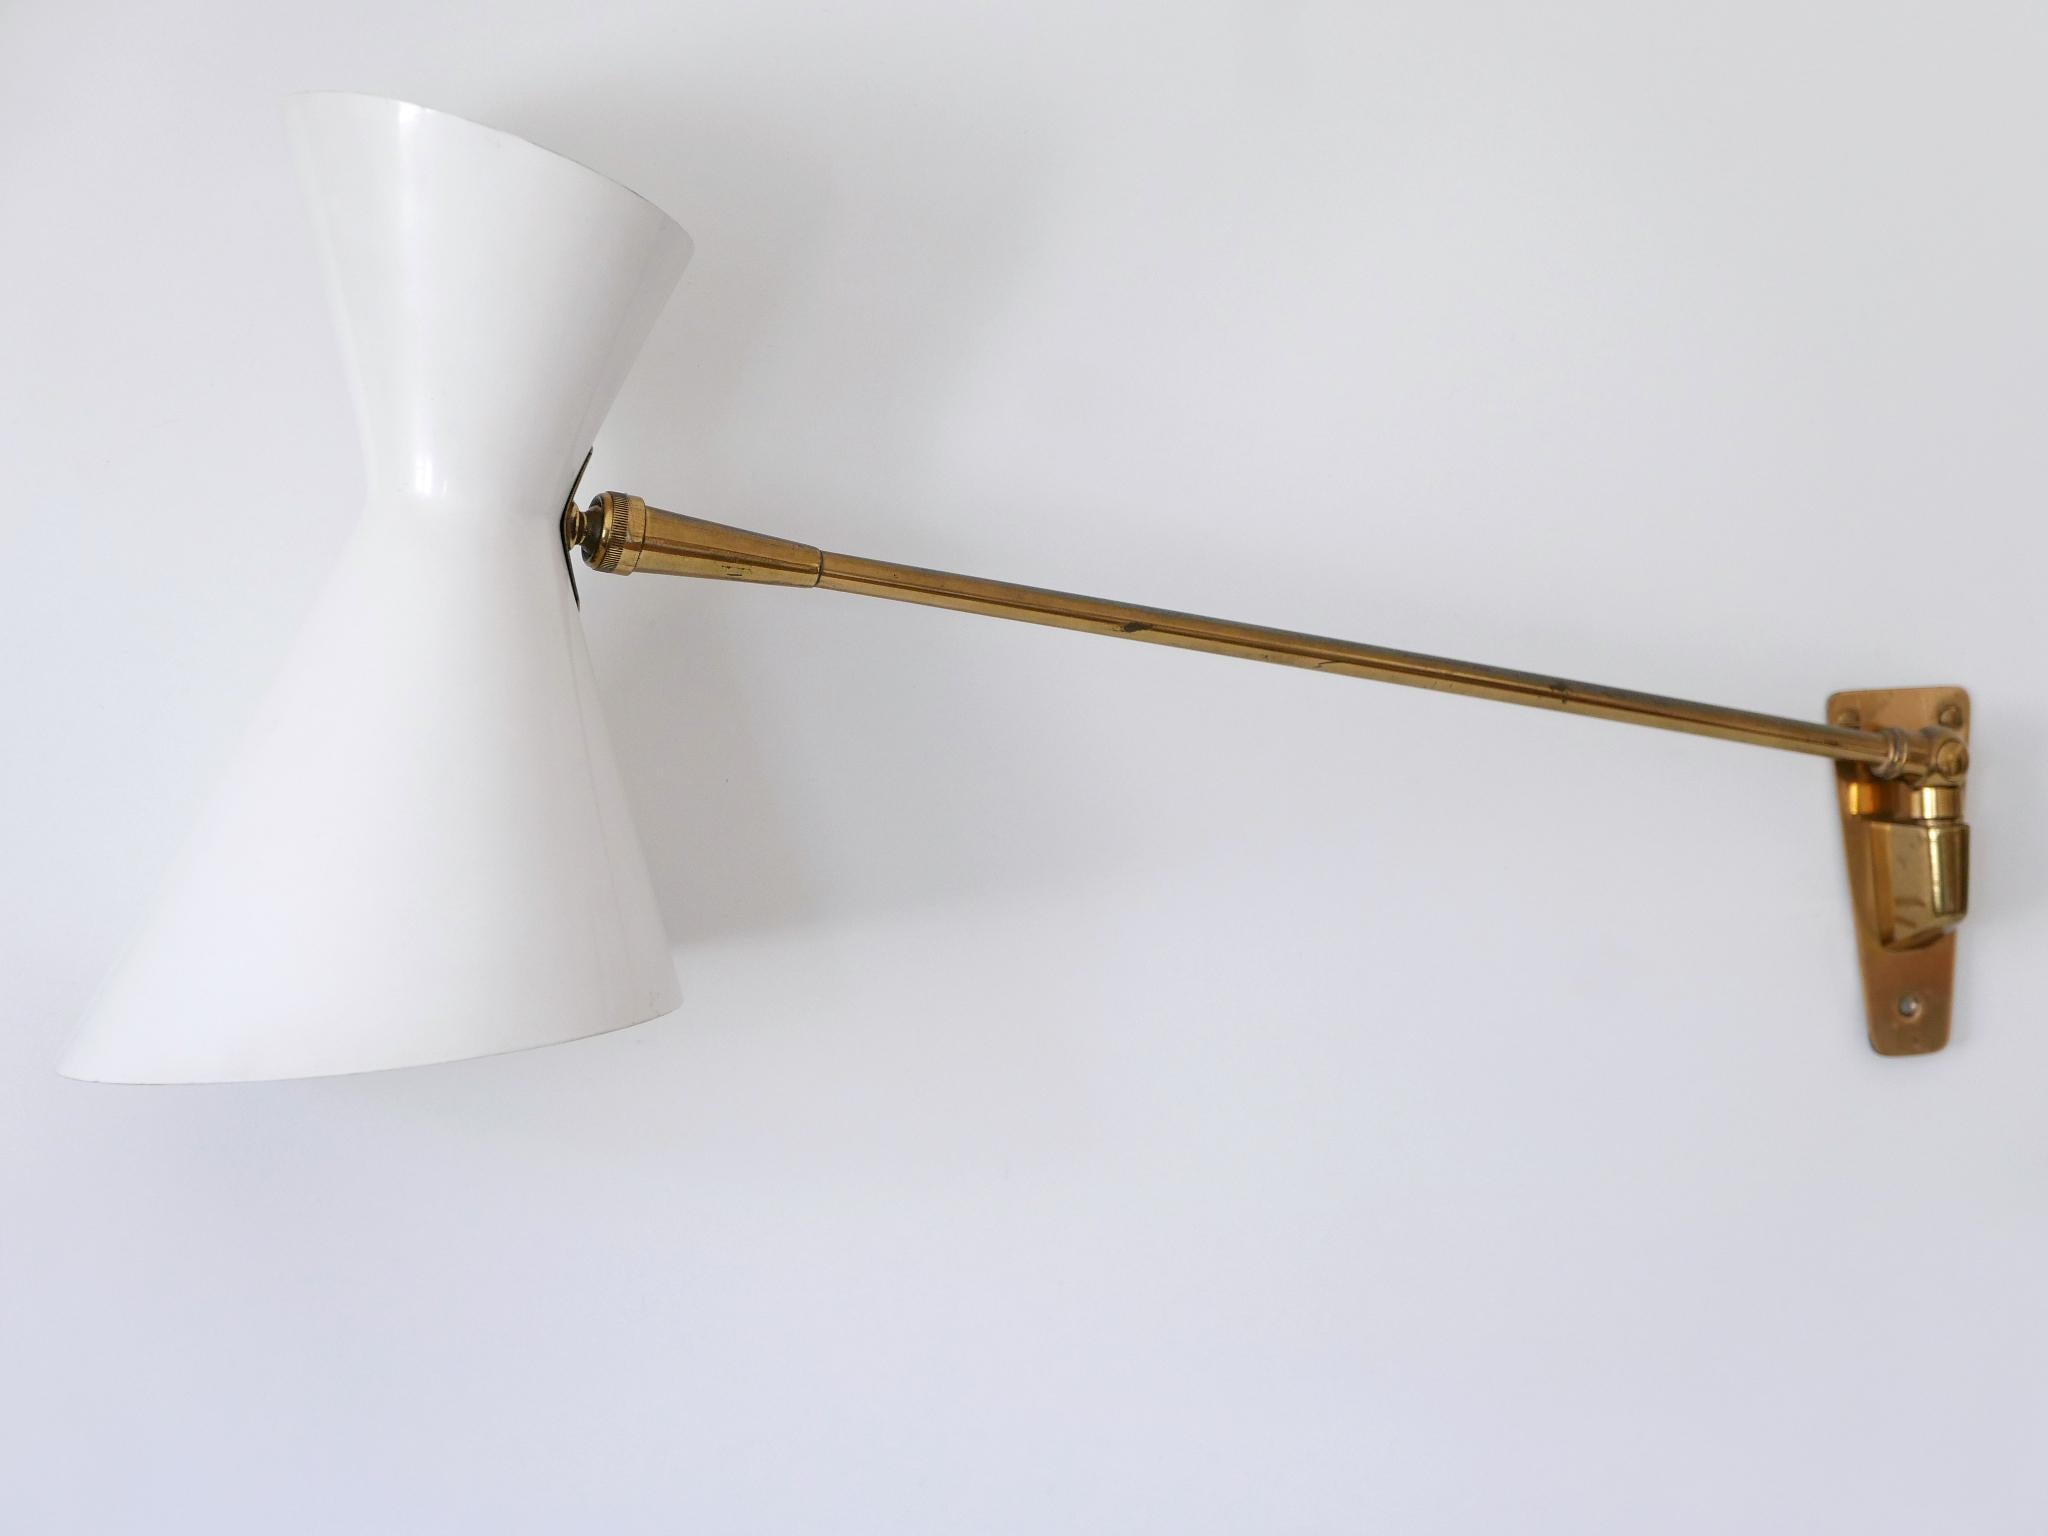 Elegant Mid Century Articulated Diabolo Wall Lamp by Belmag Switzerland 1950s For Sale 3